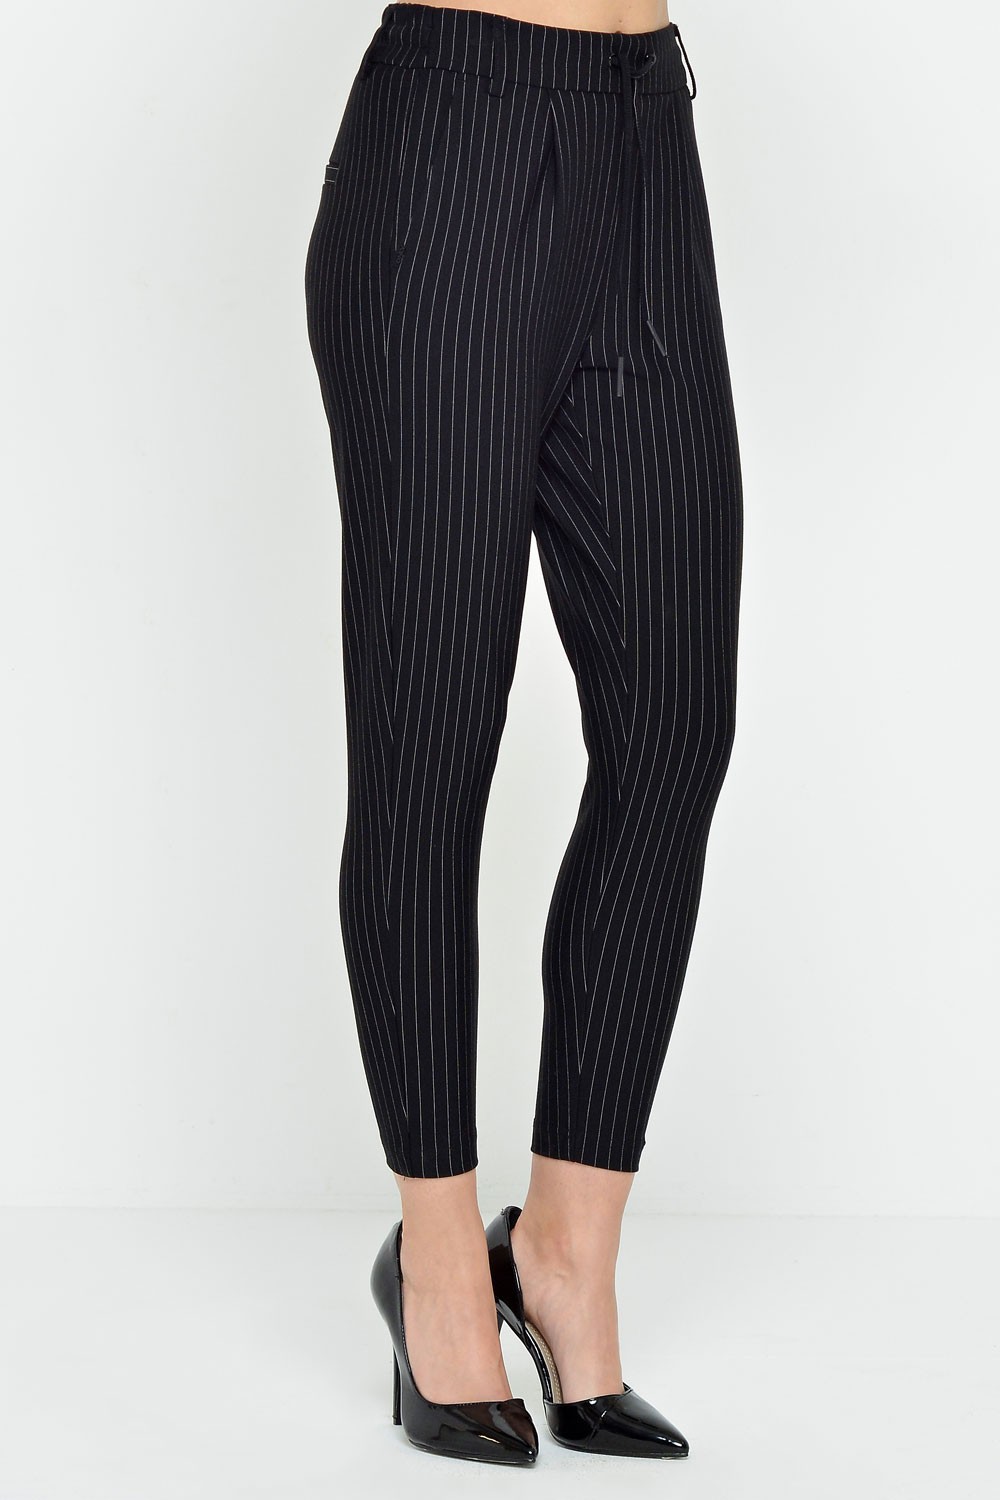 Only Poptrash Regular Classic Pinstripe Pants in Black | iCLOTHING